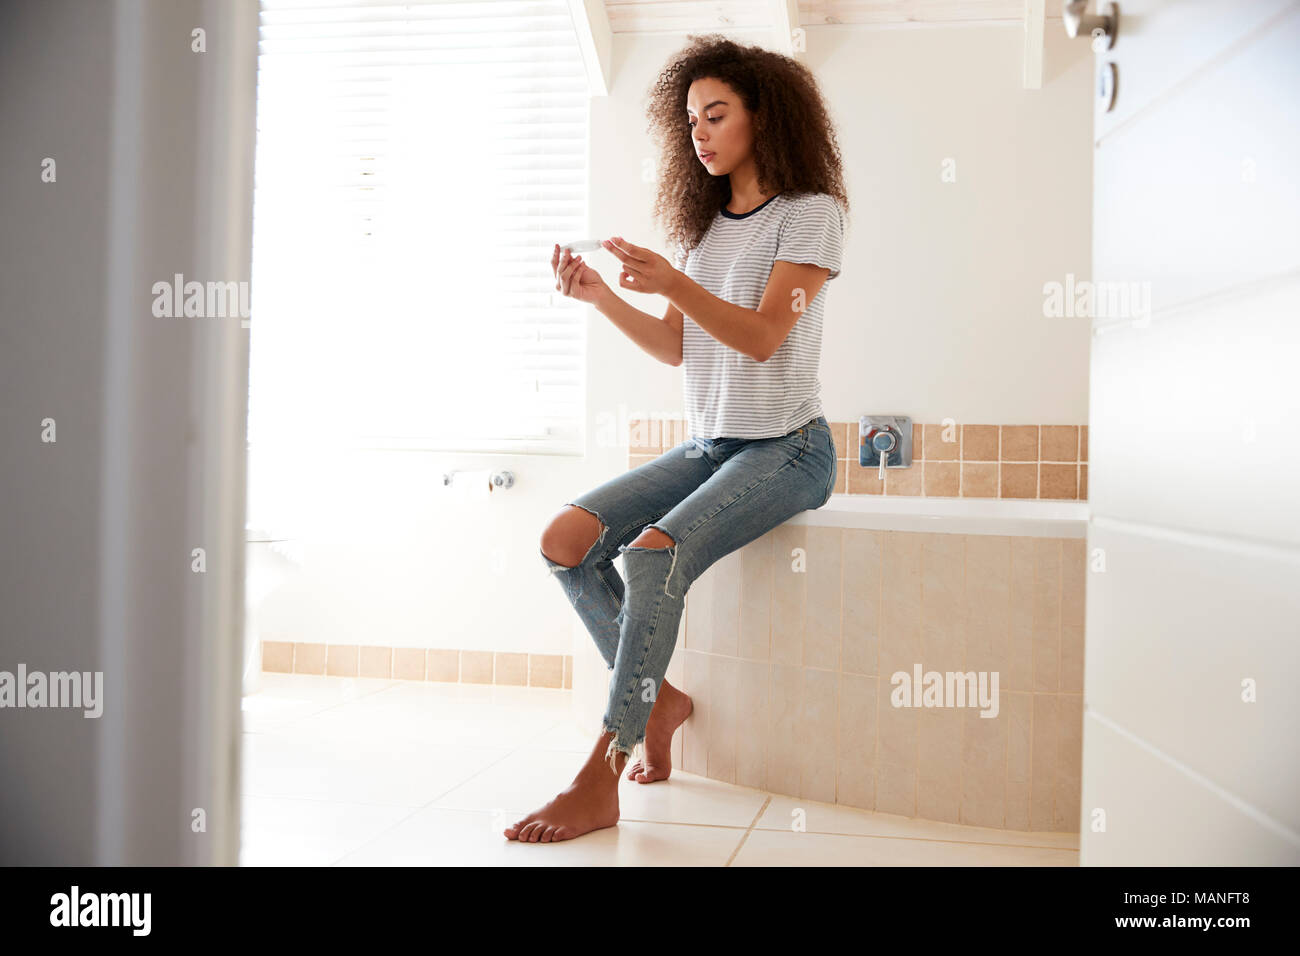 Concerned Woman In Bathroom With Home Pregnancy Test Stock Photo